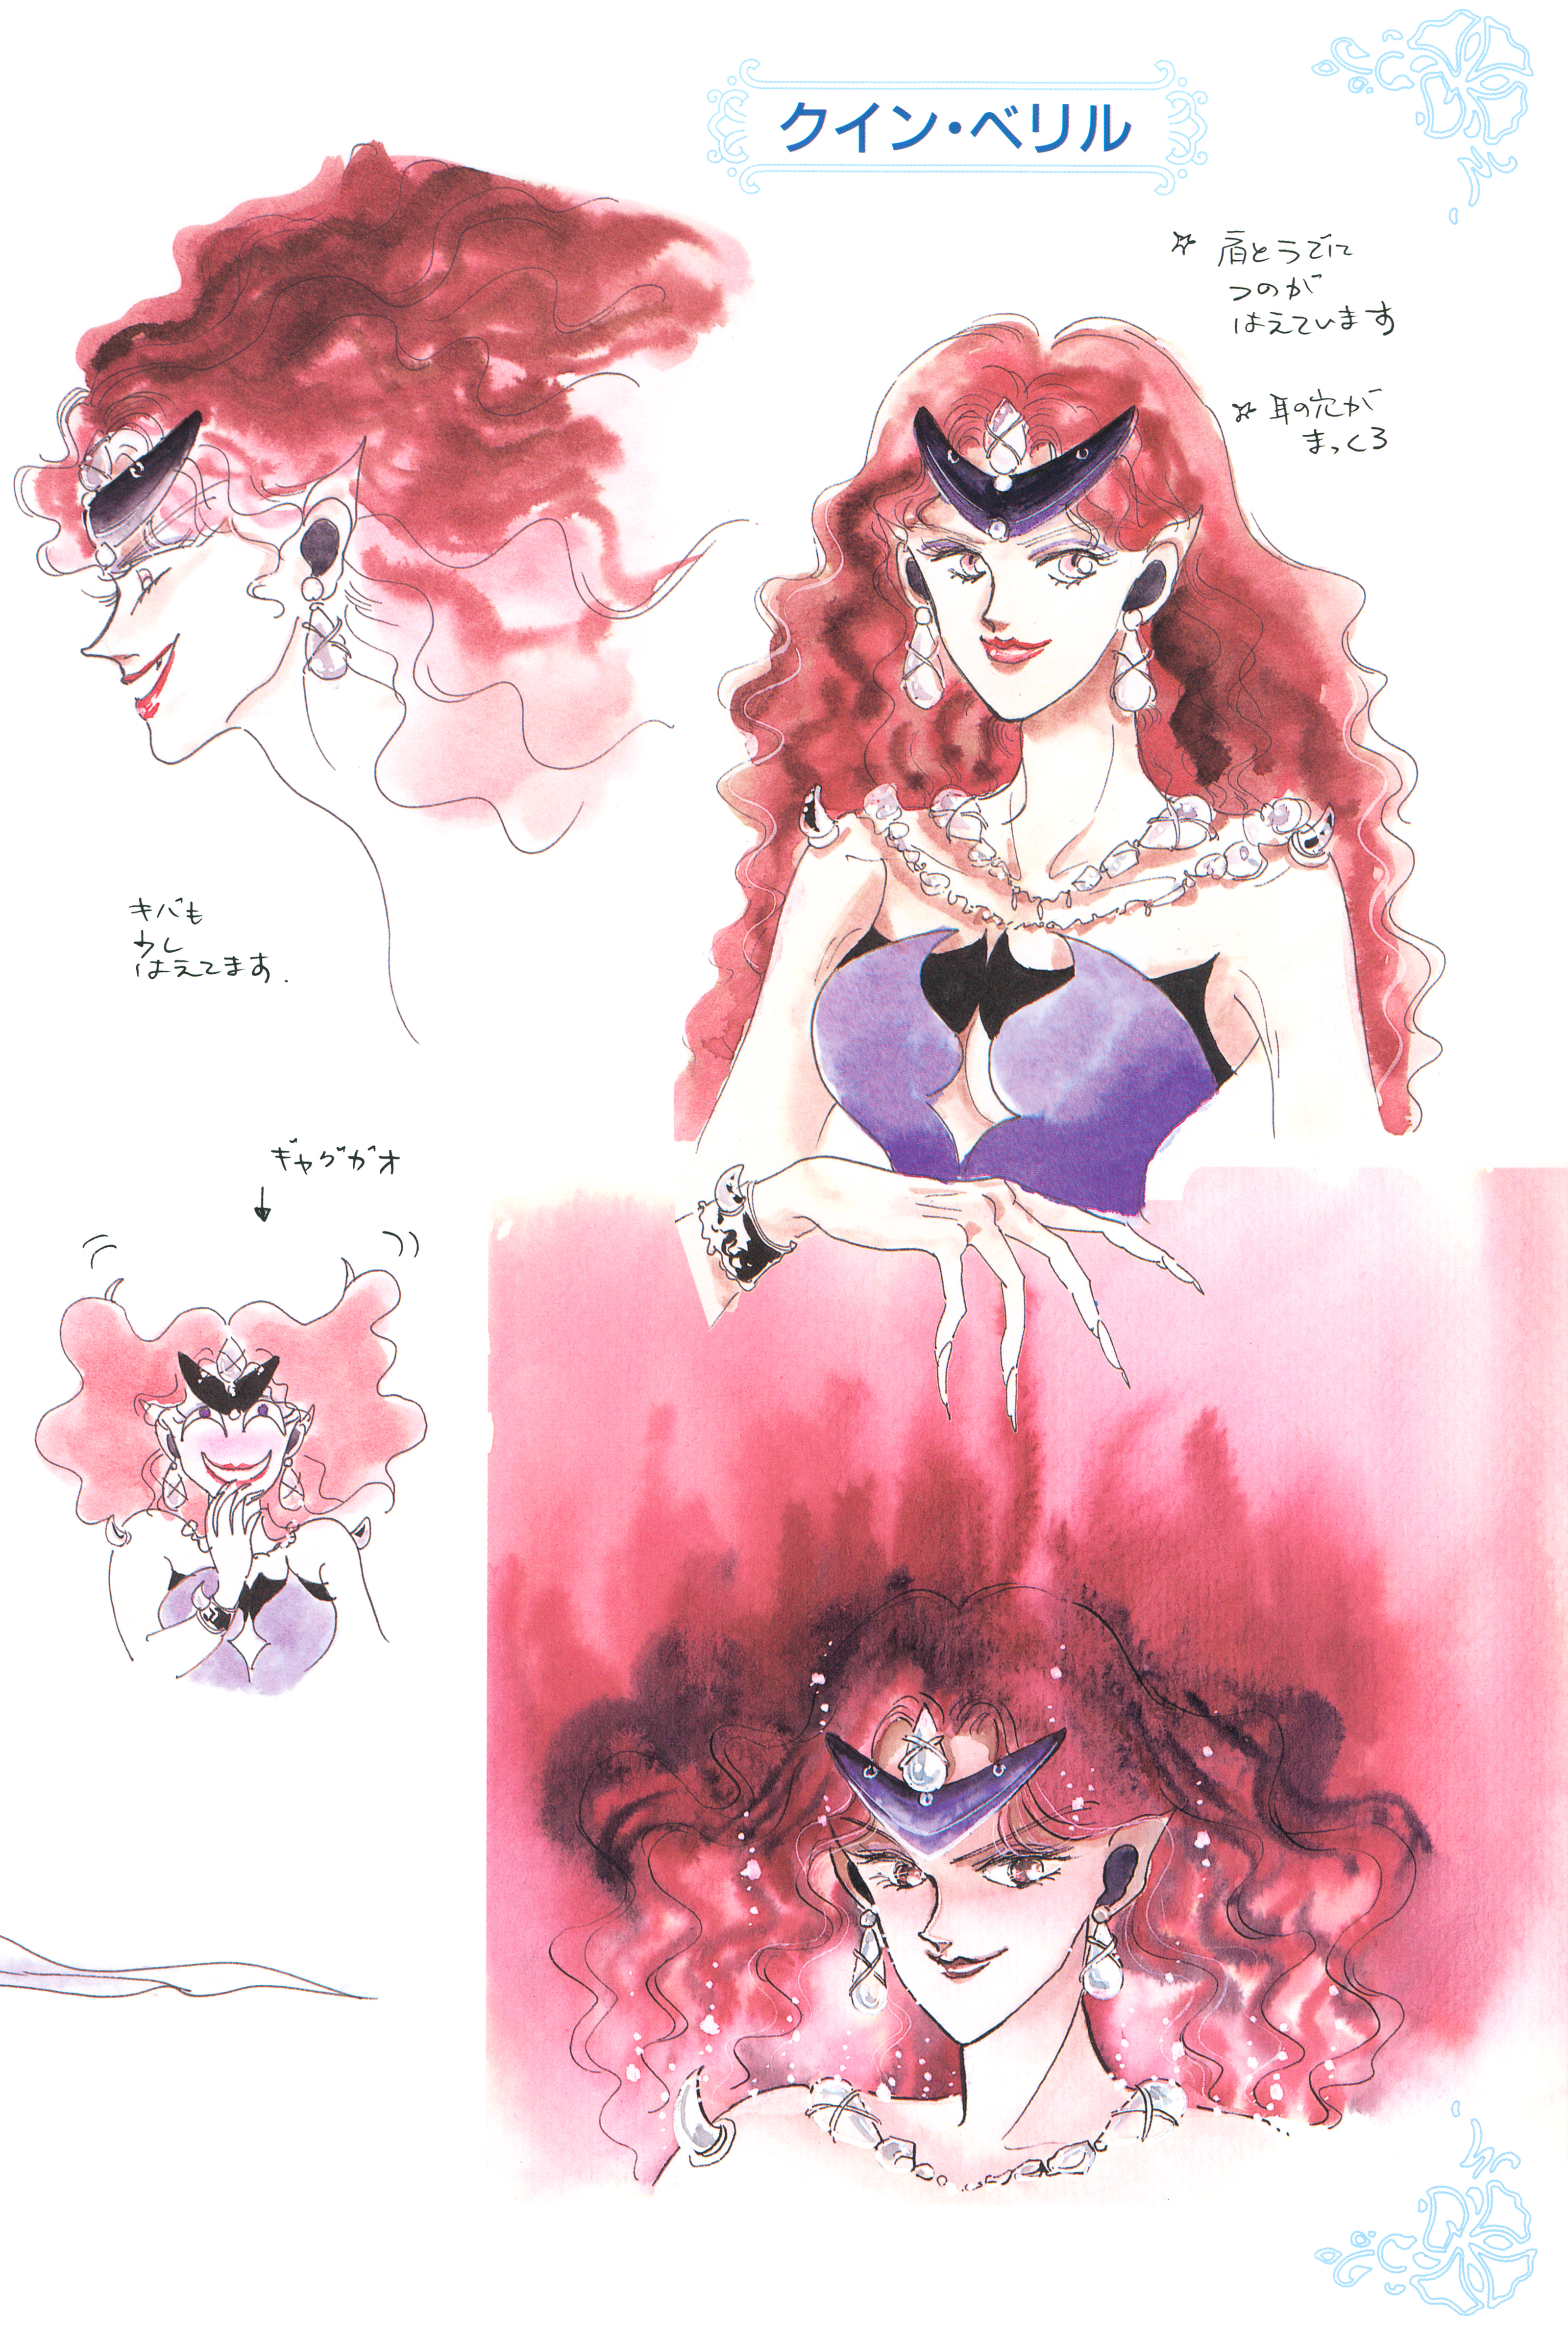 Sailor Moon Sketchbook By Naoko Takeuchi 03 By Lady Angelia 13 On Deviantart